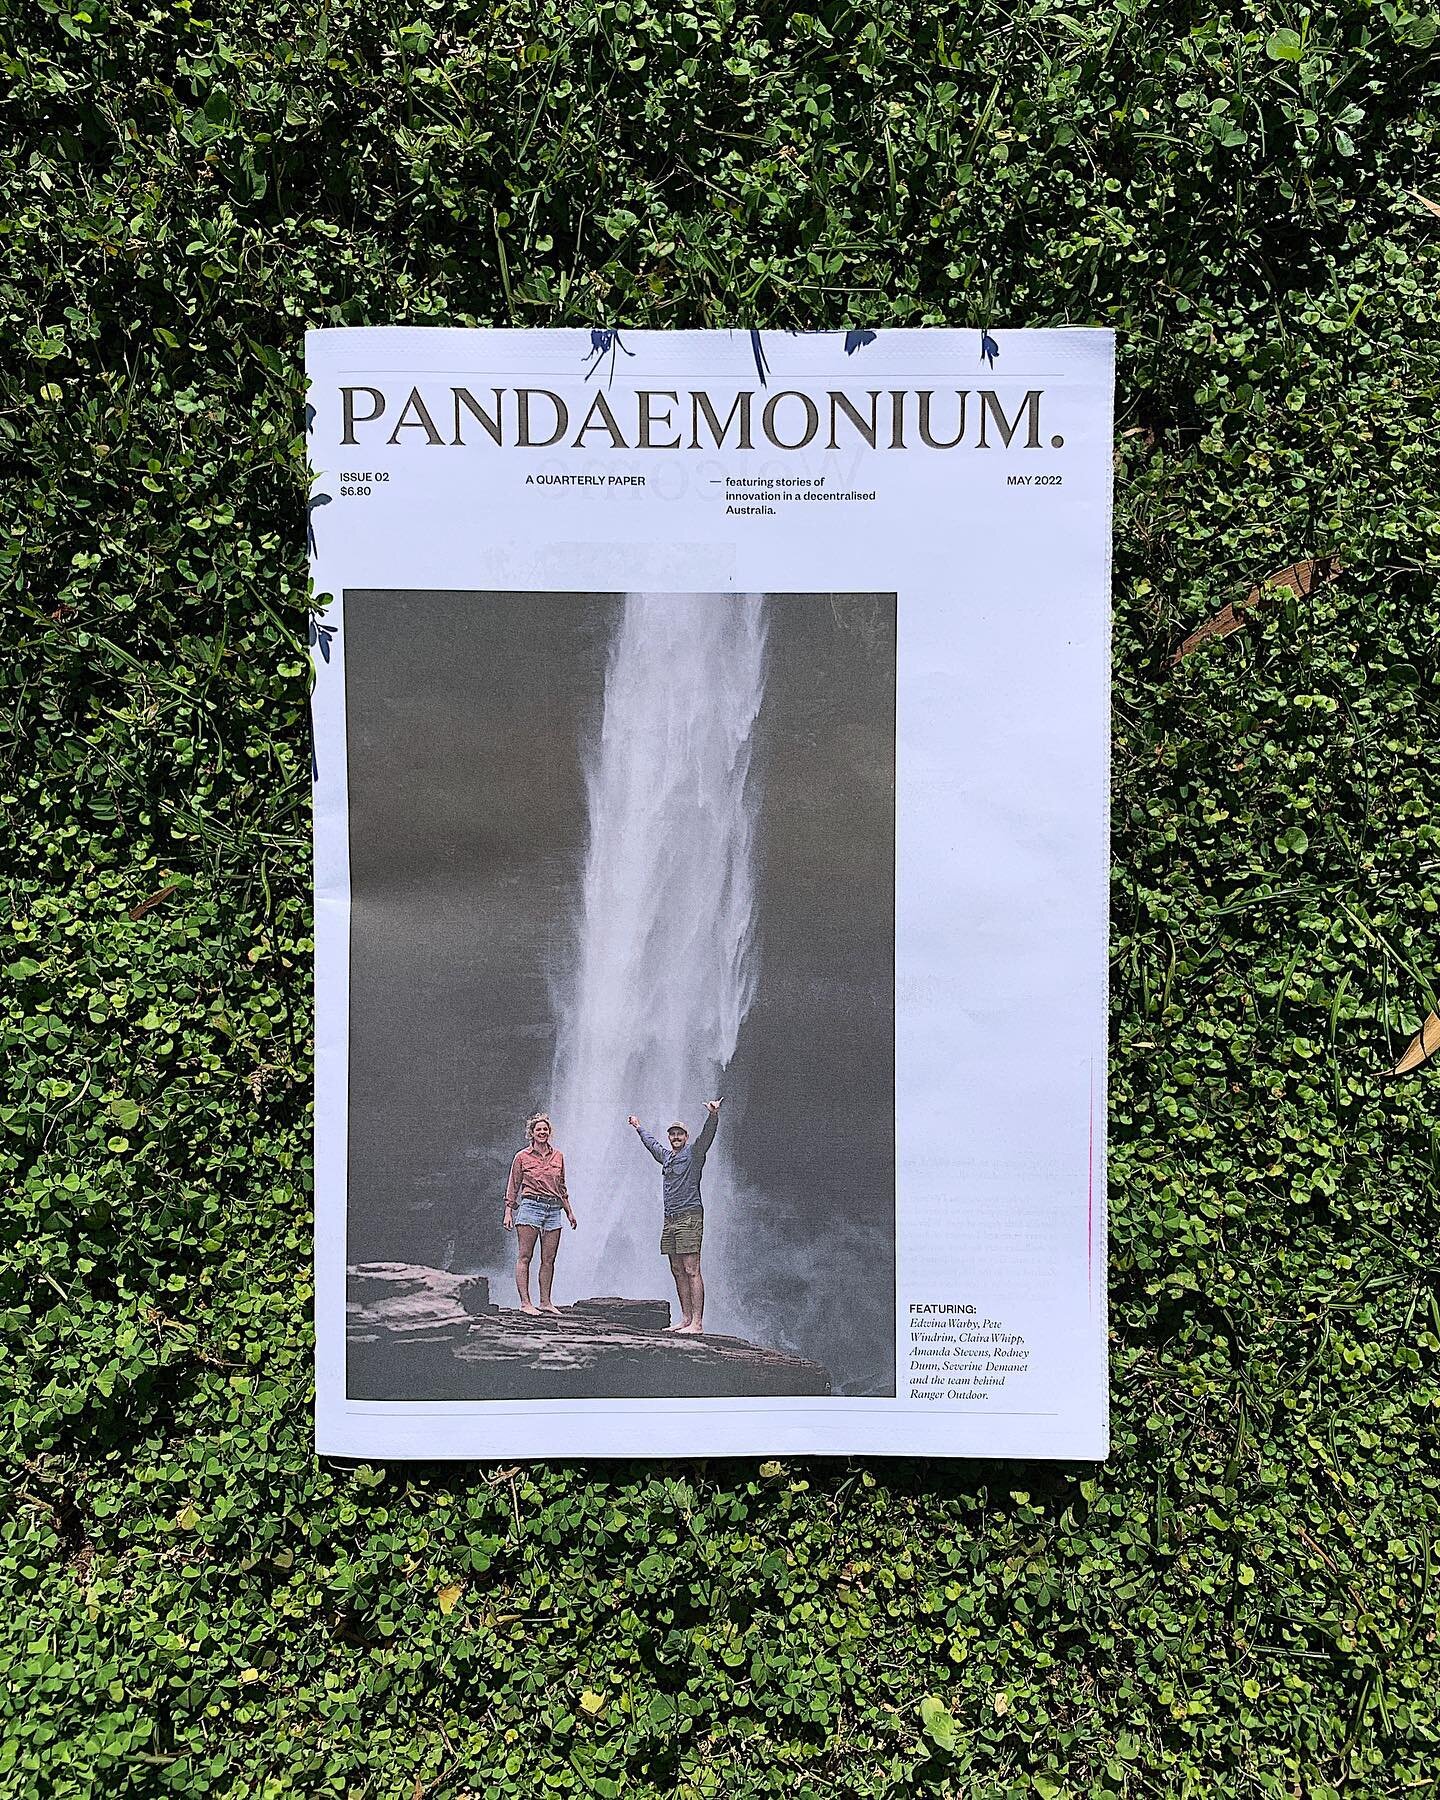 Pandaemonimum Issue 2
A quarterly paper featuring stories of innovation in a decentralised Australia.

We love a collaboration project 🌞

Publication Design and Pre-Press Production by @studio.musemuse 
Publisher, Editorial and Layout by @p.andaemon